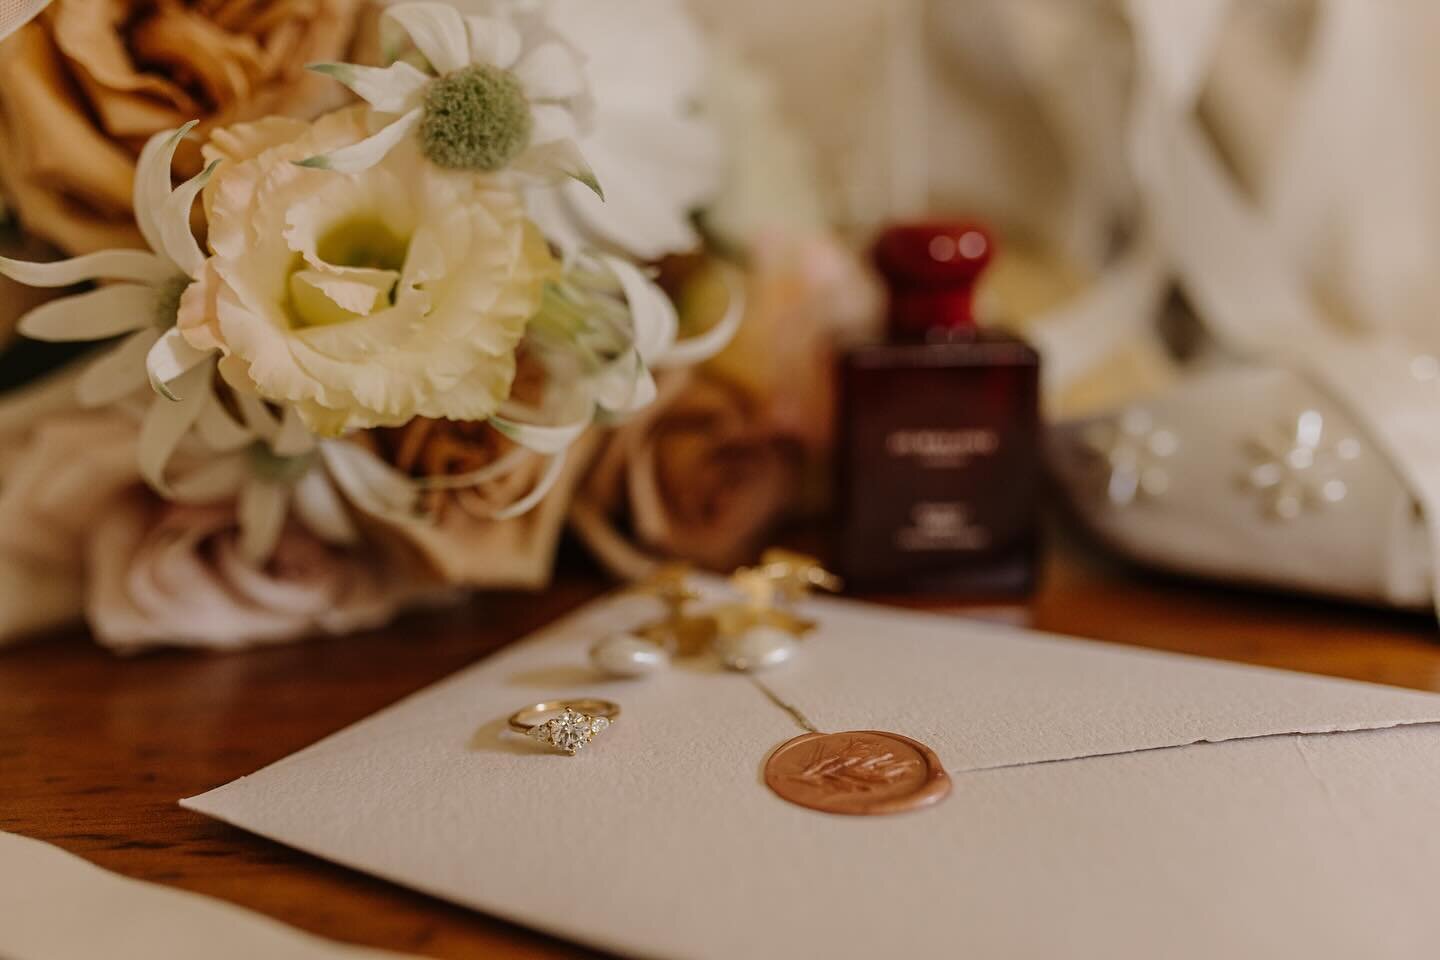 It&rsquo;s in the details ✨ There are oh so many ways we can add a personalised touch or extra special detail to your event stationery.

I love a wax seal or a handmade paper, ribbons too. A special quote or lyric or a mini monogram. I so delight in 